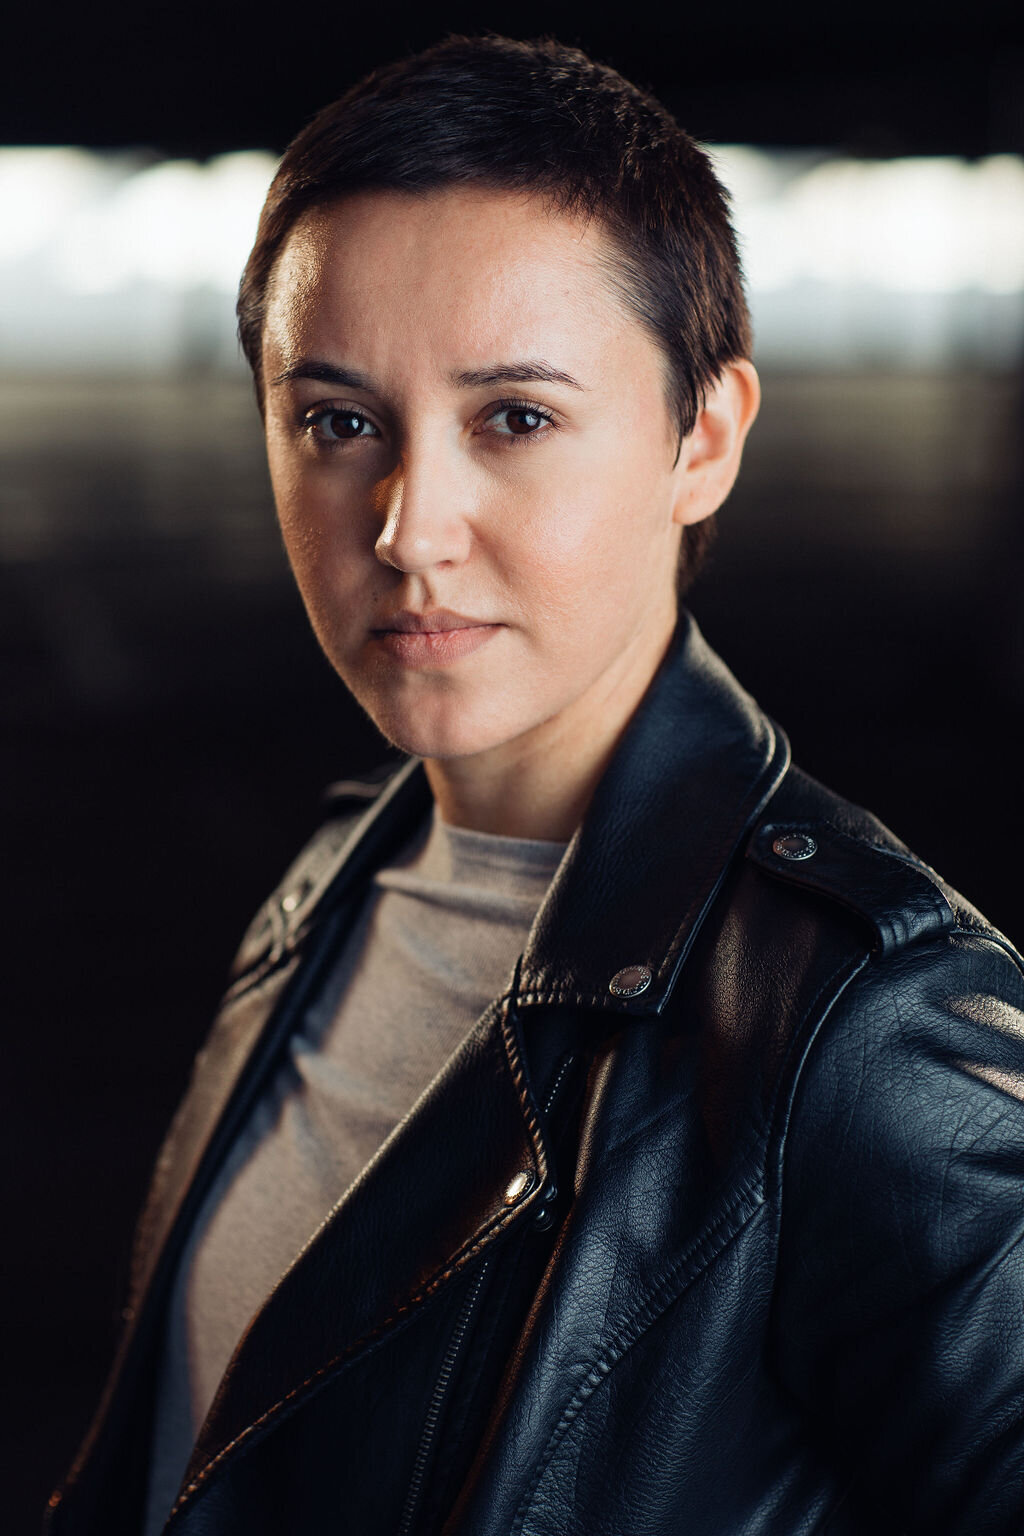 Headshot Photograph Of Young Woman In Outer Black Leather Jacket And Inner Light Gray Shirt Los Angeles